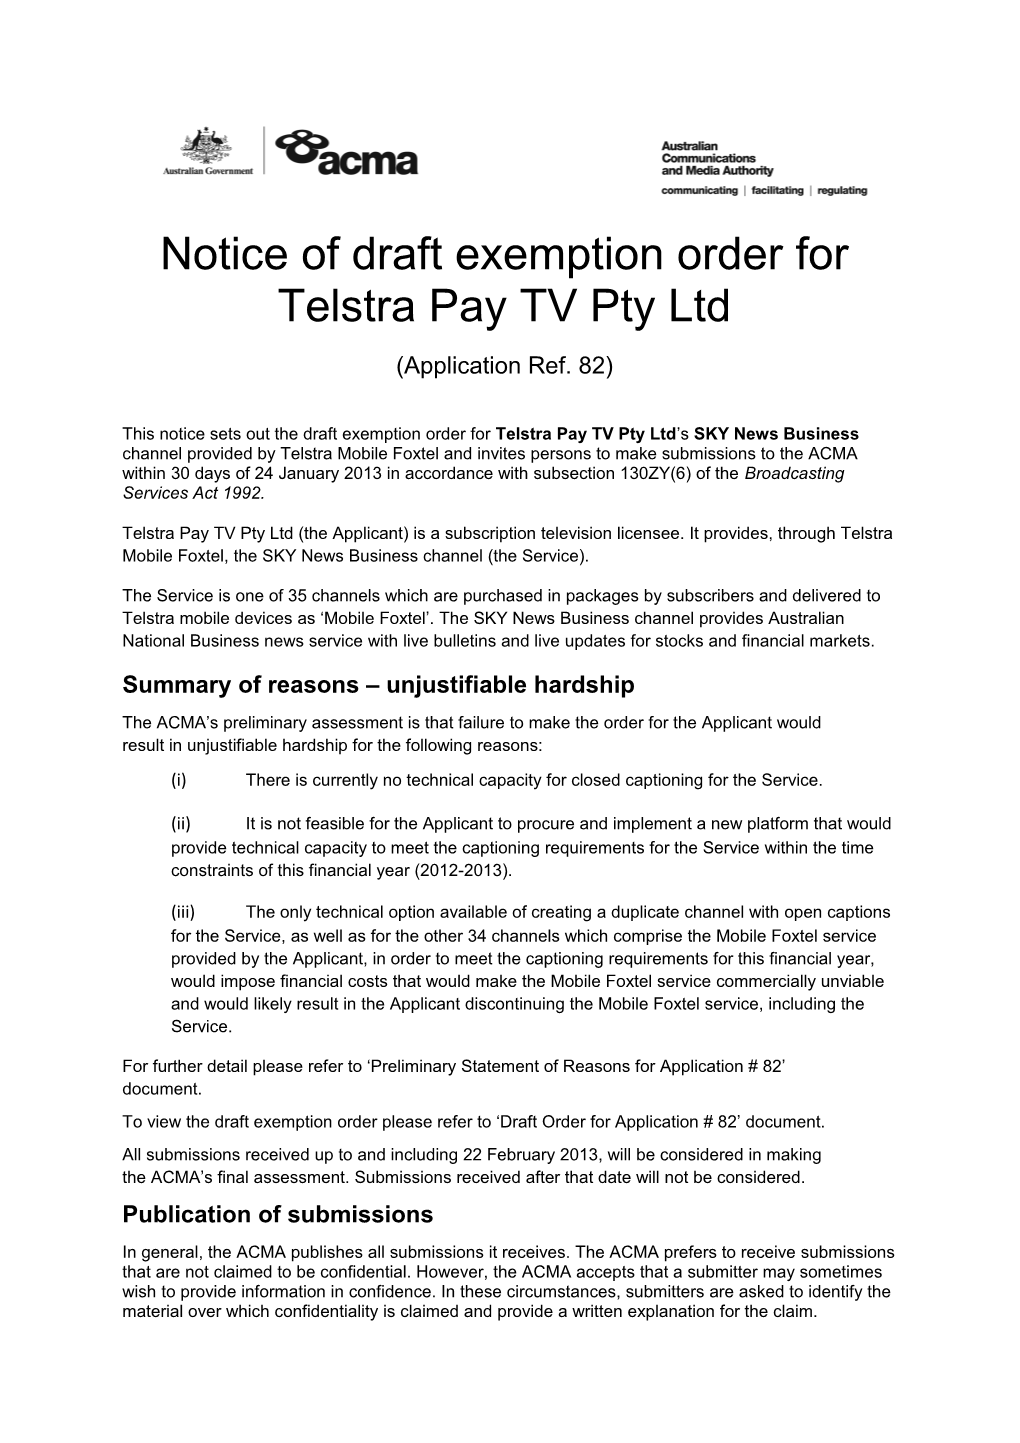 Notice of Draft Exemption Order for Telstra Pay TV Pty Ltd Cons #82